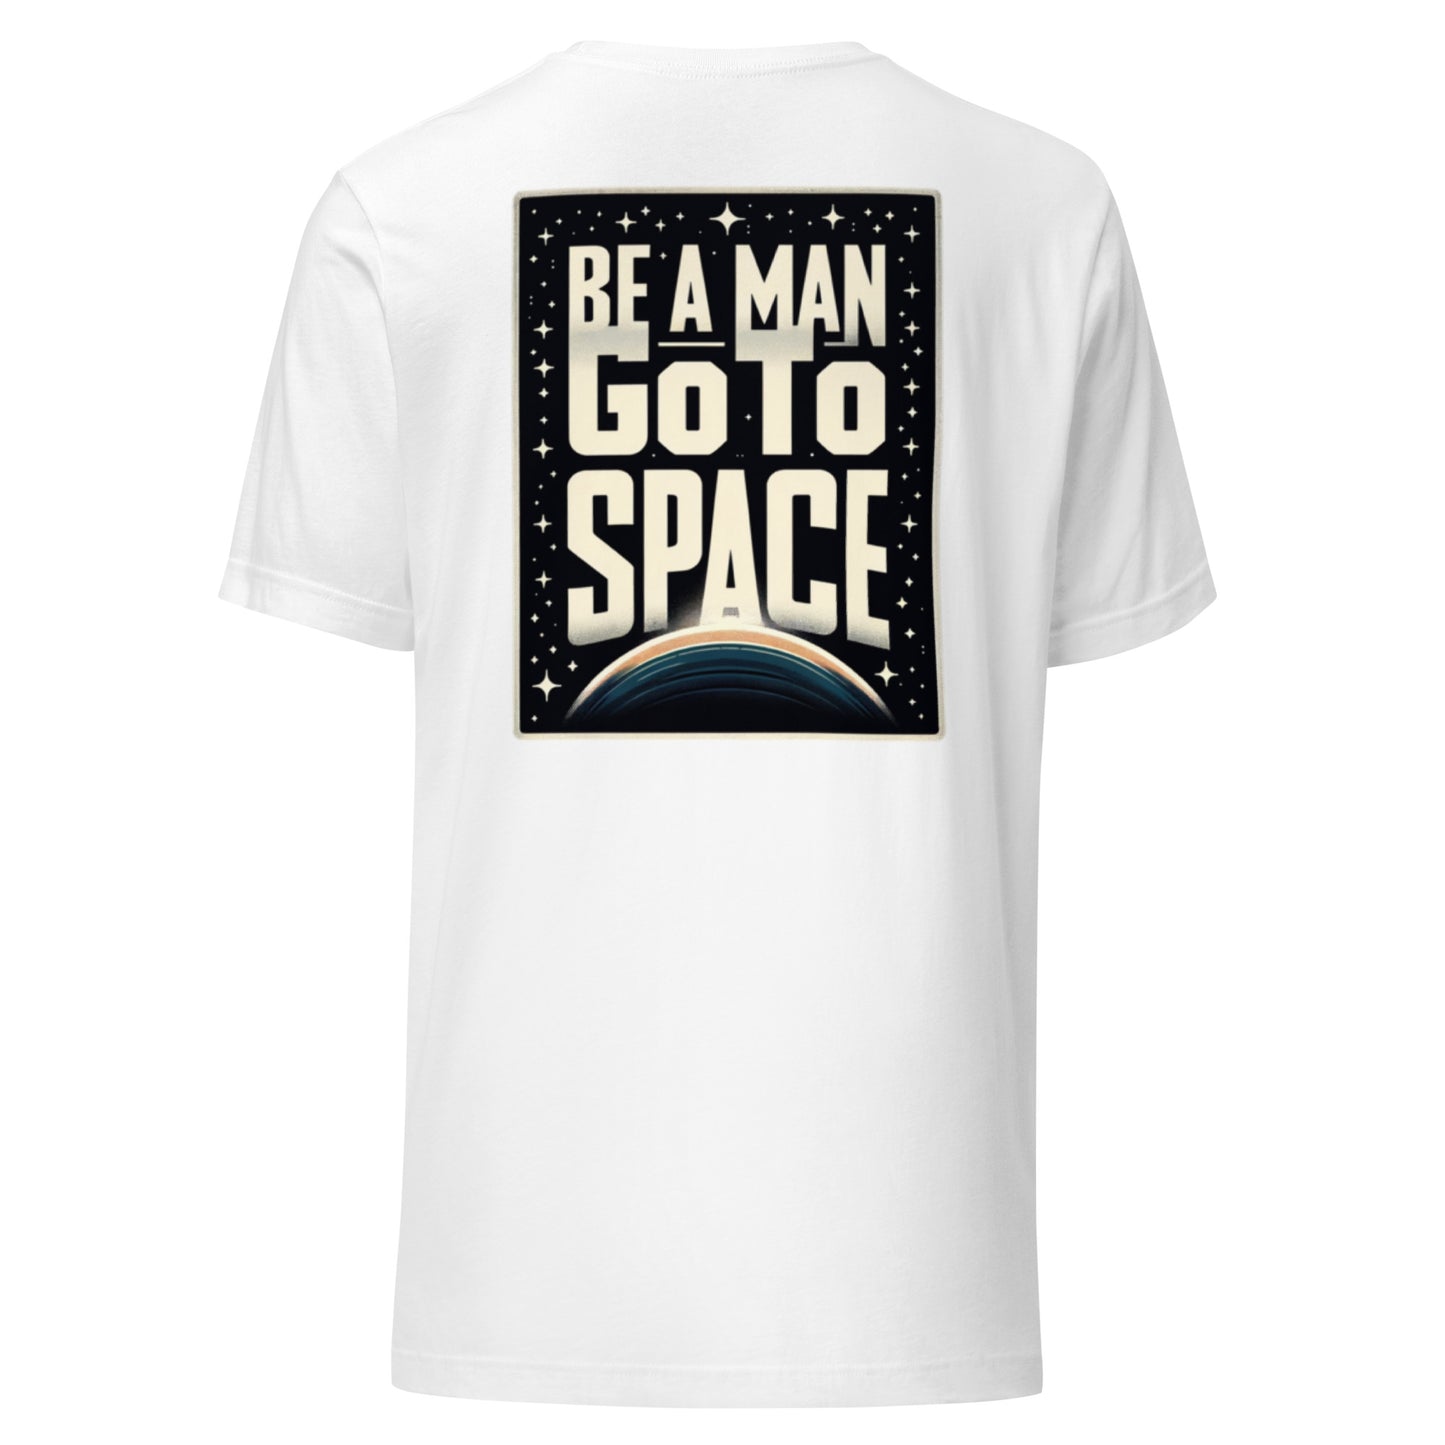 Be A Man Go To Space Tee